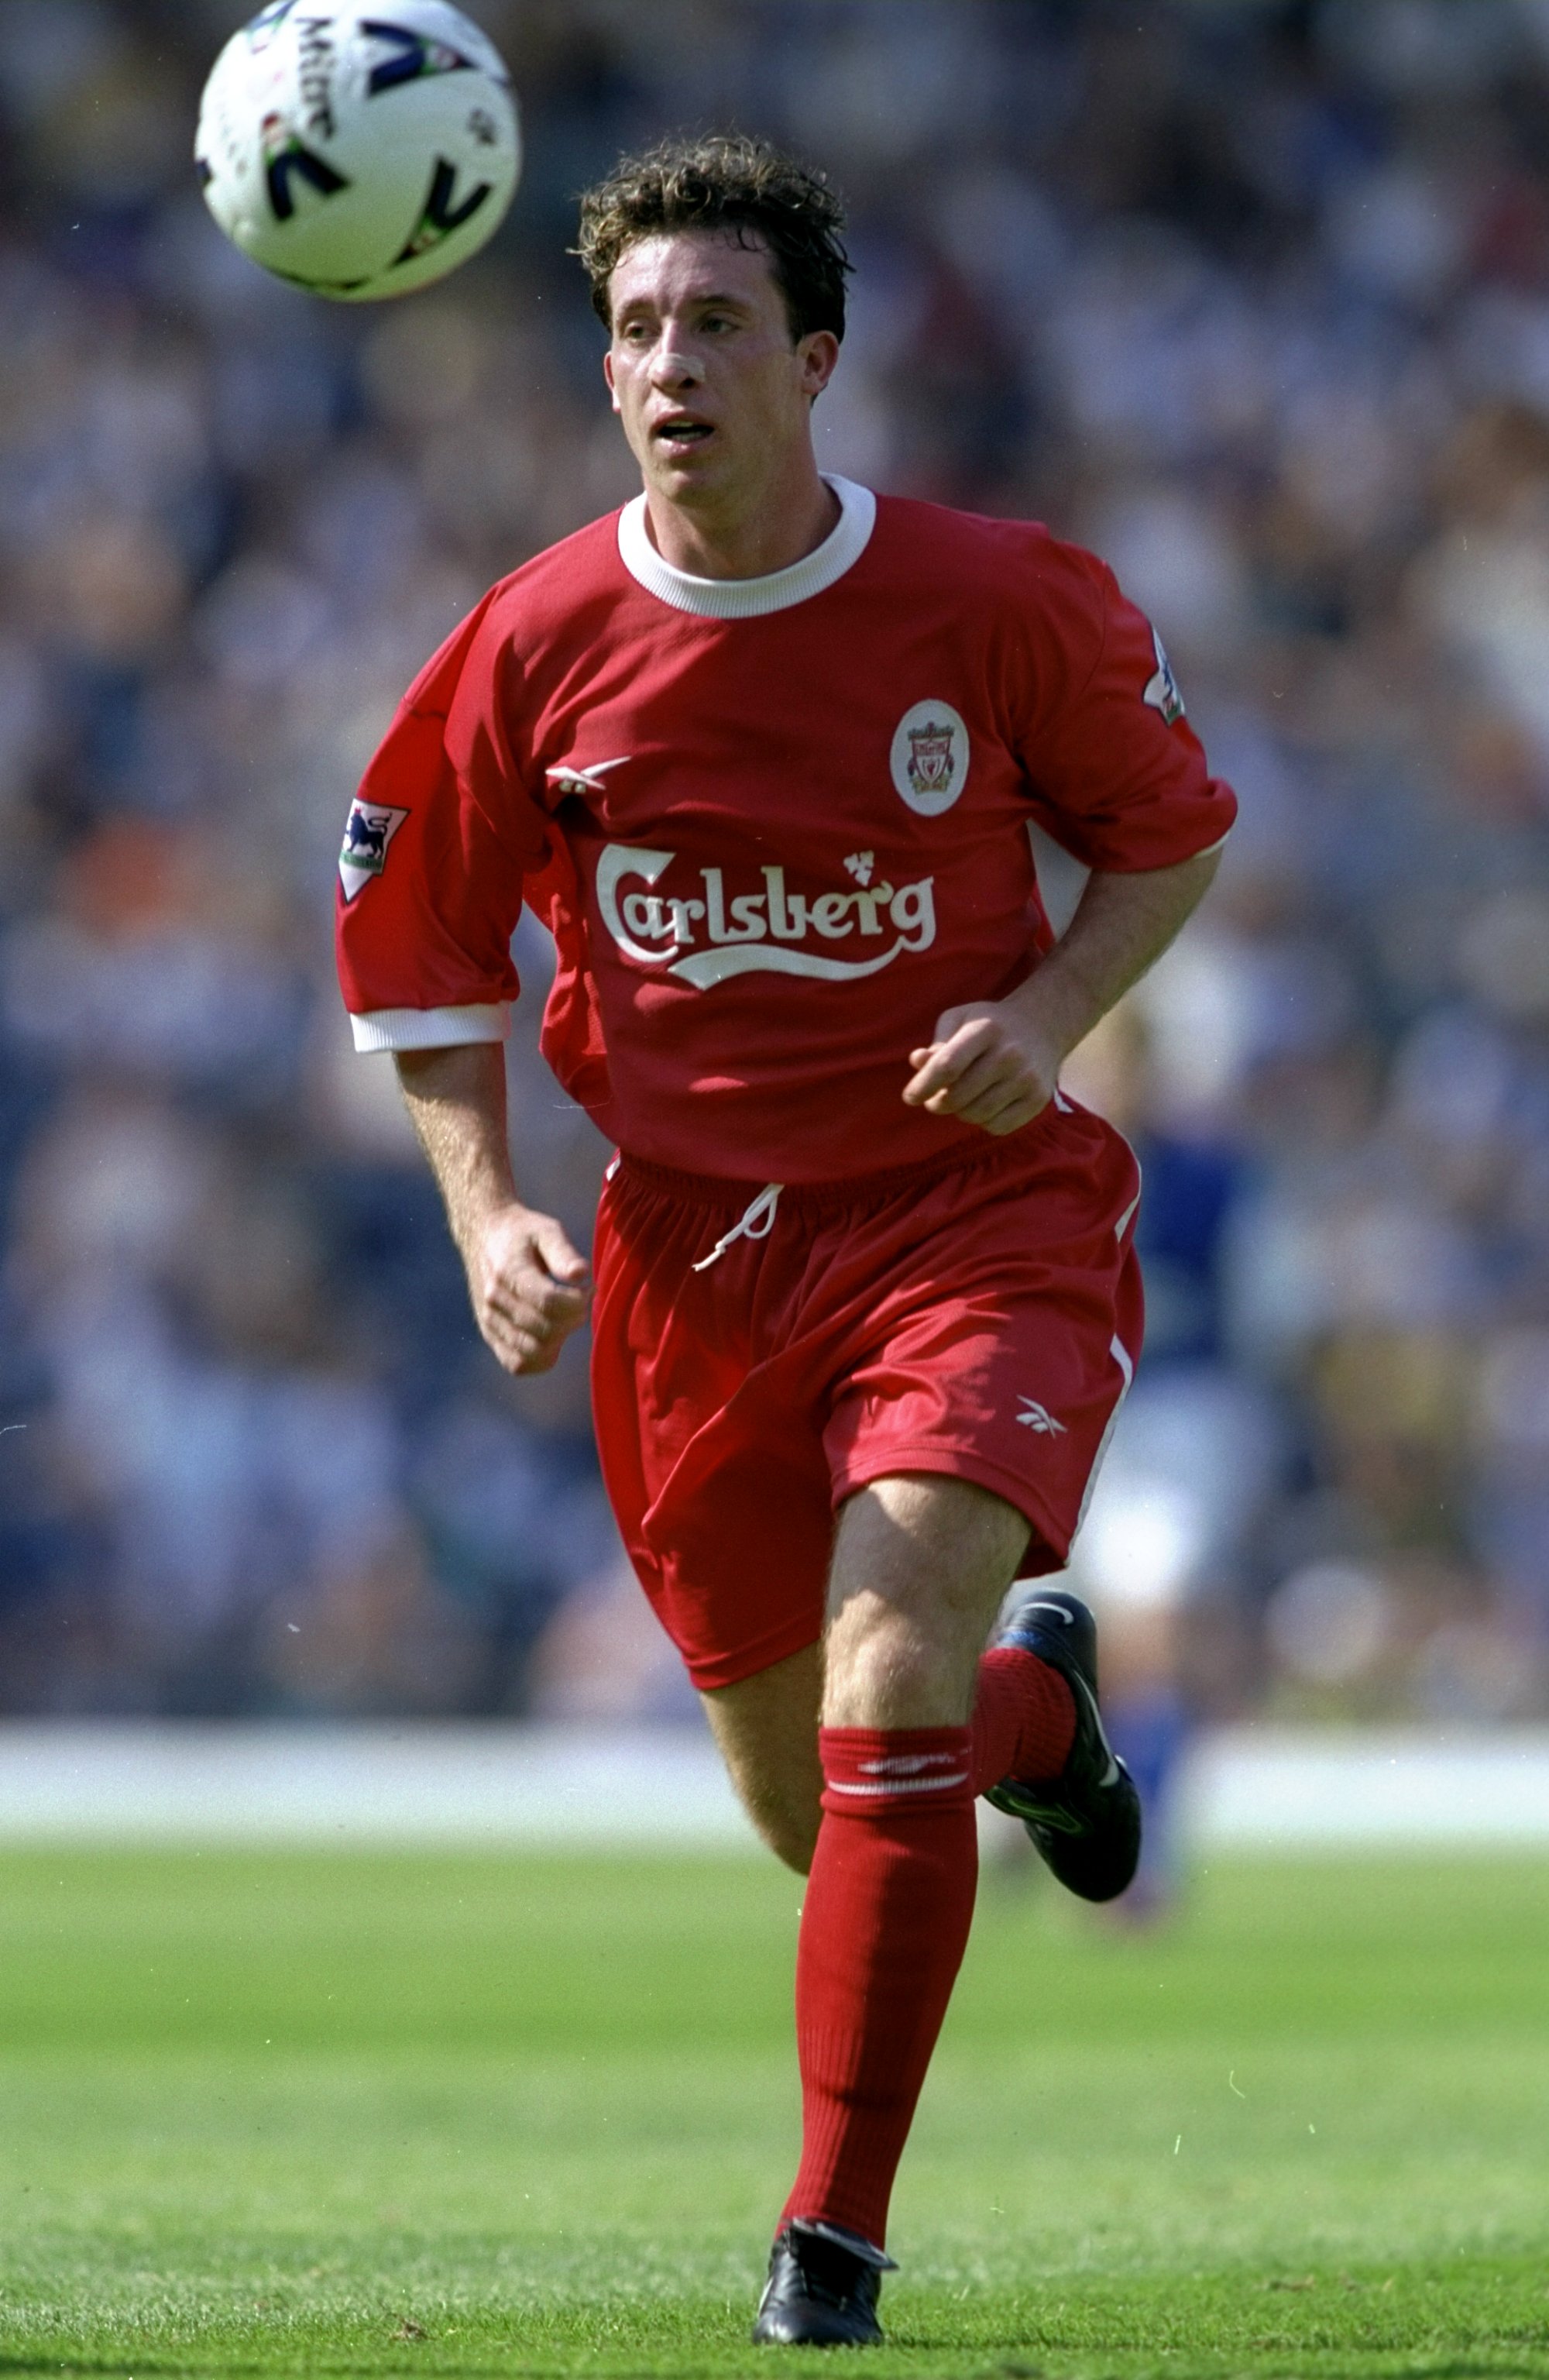 31 Jul 1999:  Robbie Fowler of Liverpool in action during the pre-season friendly match against Blackburn Rovers played at Ewood Park in Blackburn, England.  The match finished in a 2-2 draw. \ Mandatory Credit: Clive Brunskill /Allsport